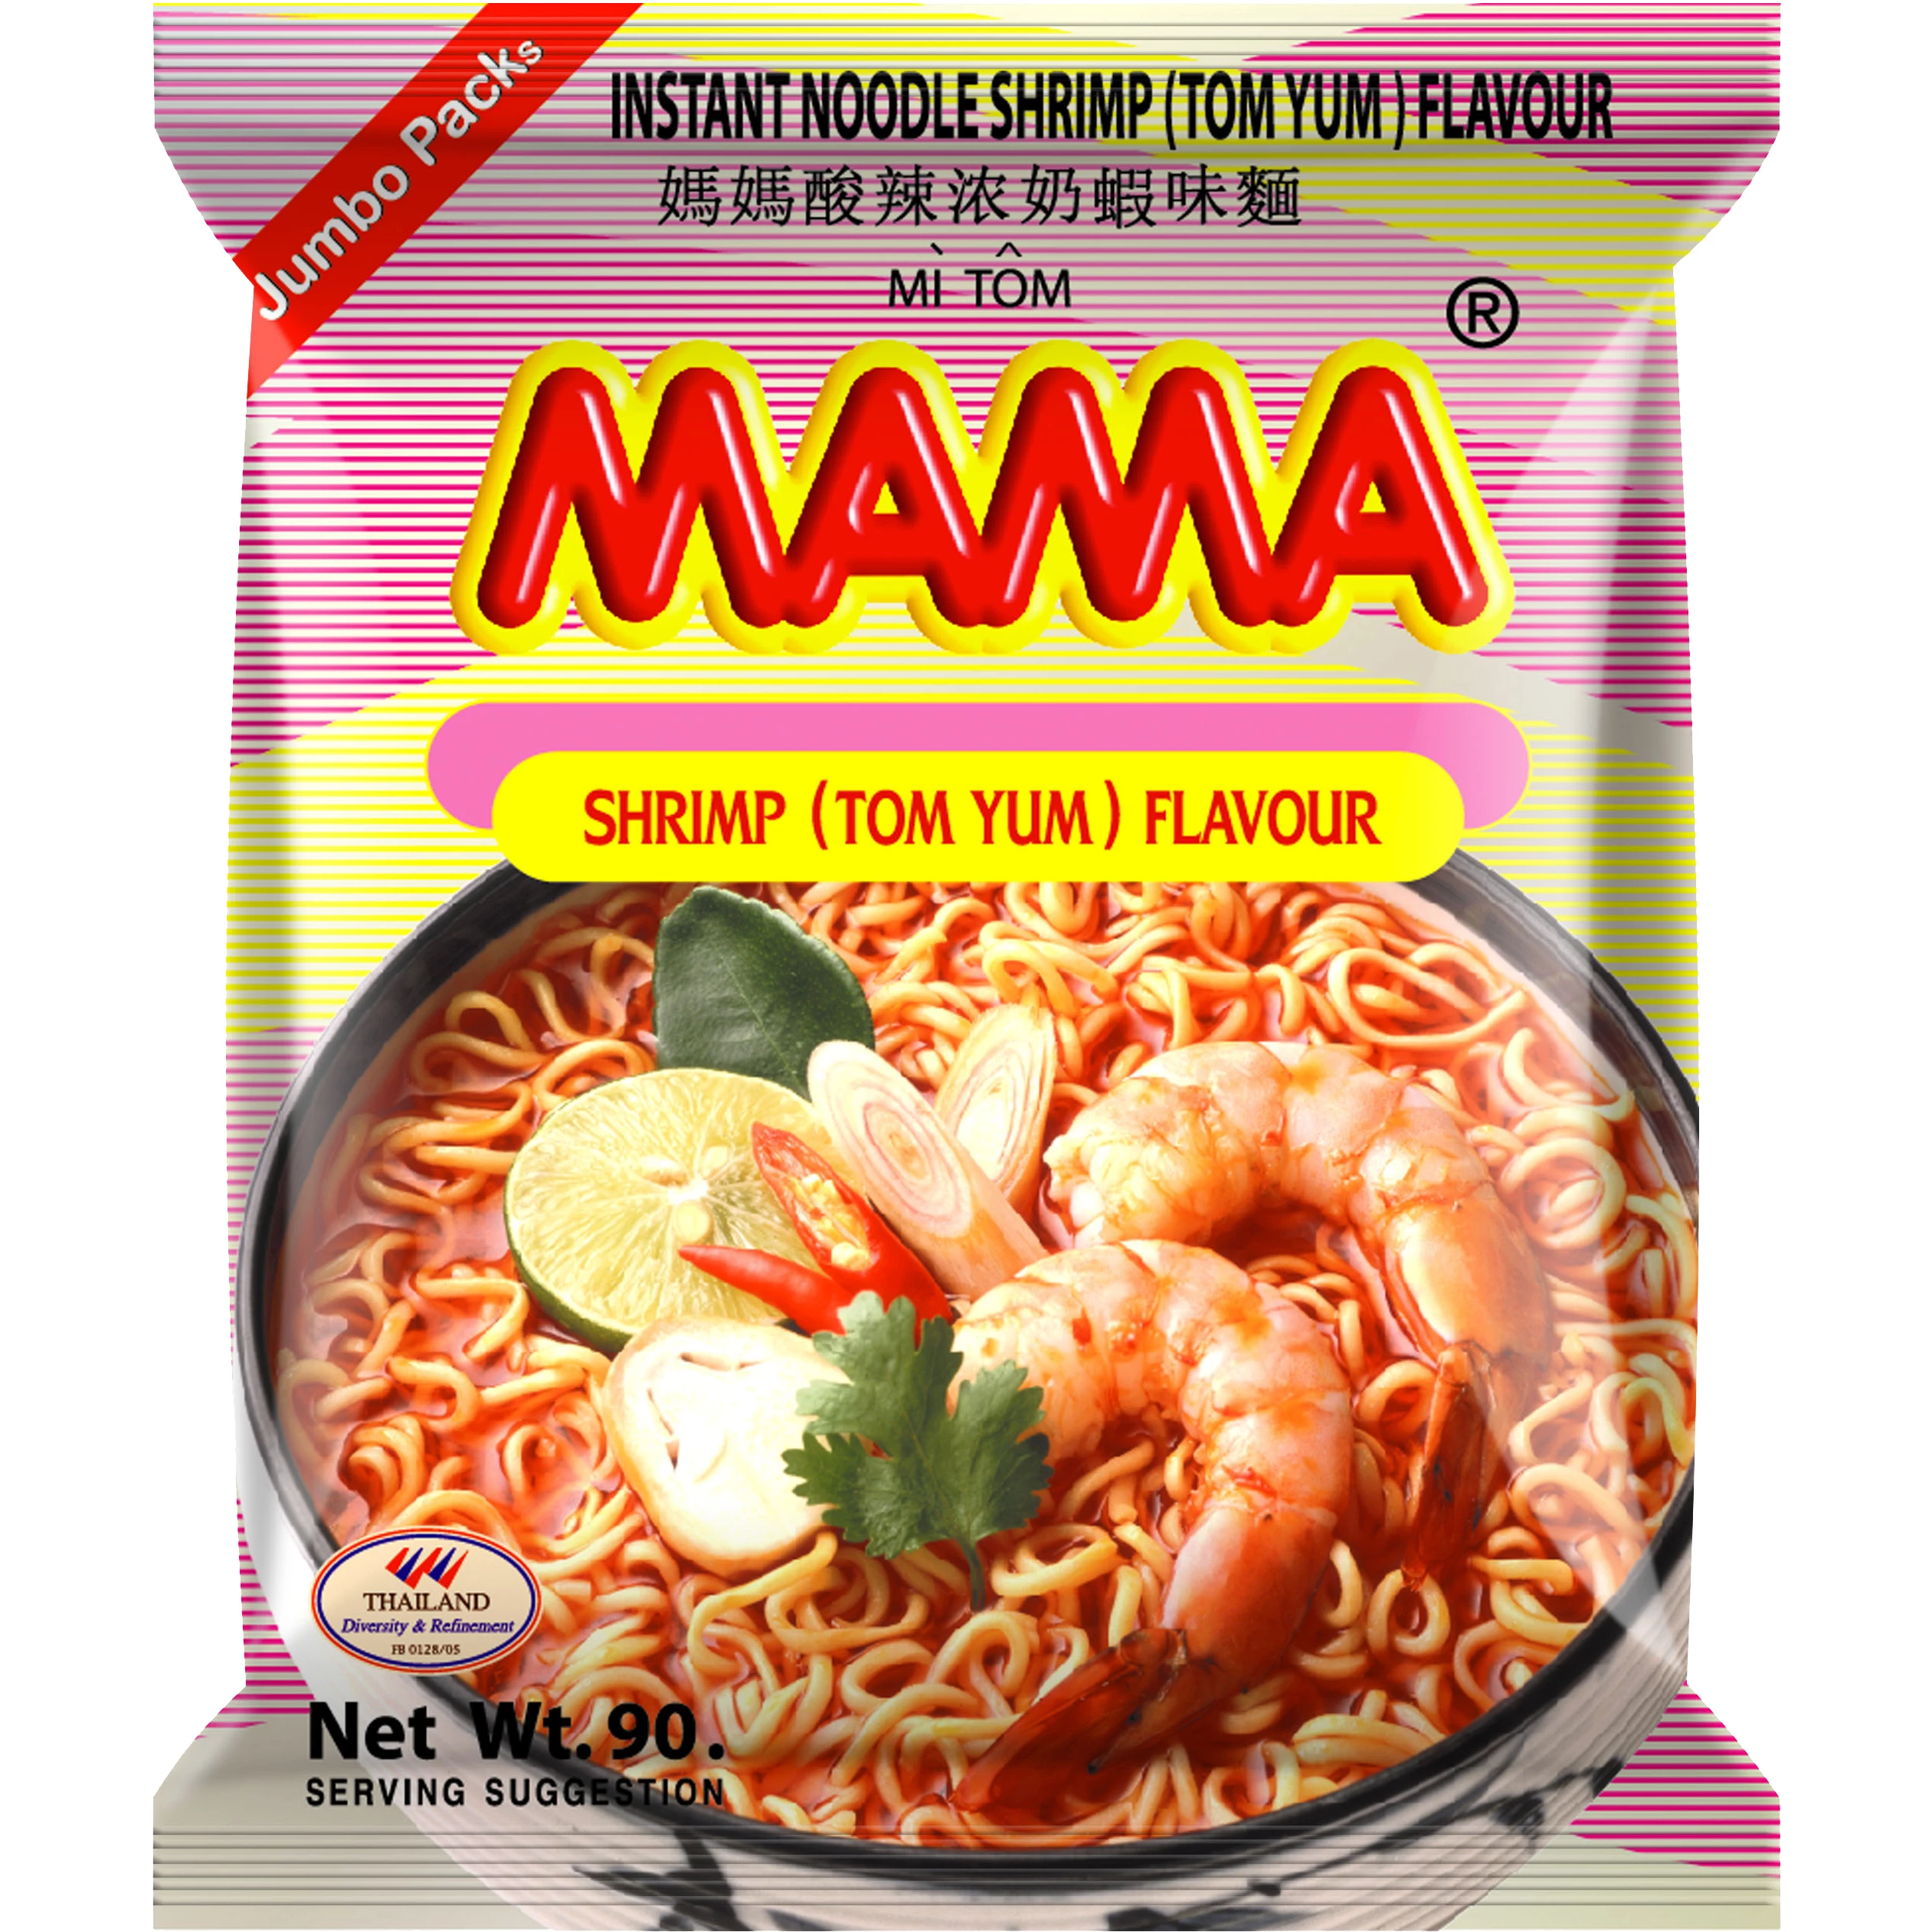 Noodles istantanei. Gamberetti 20 X 90 Gr - Mama